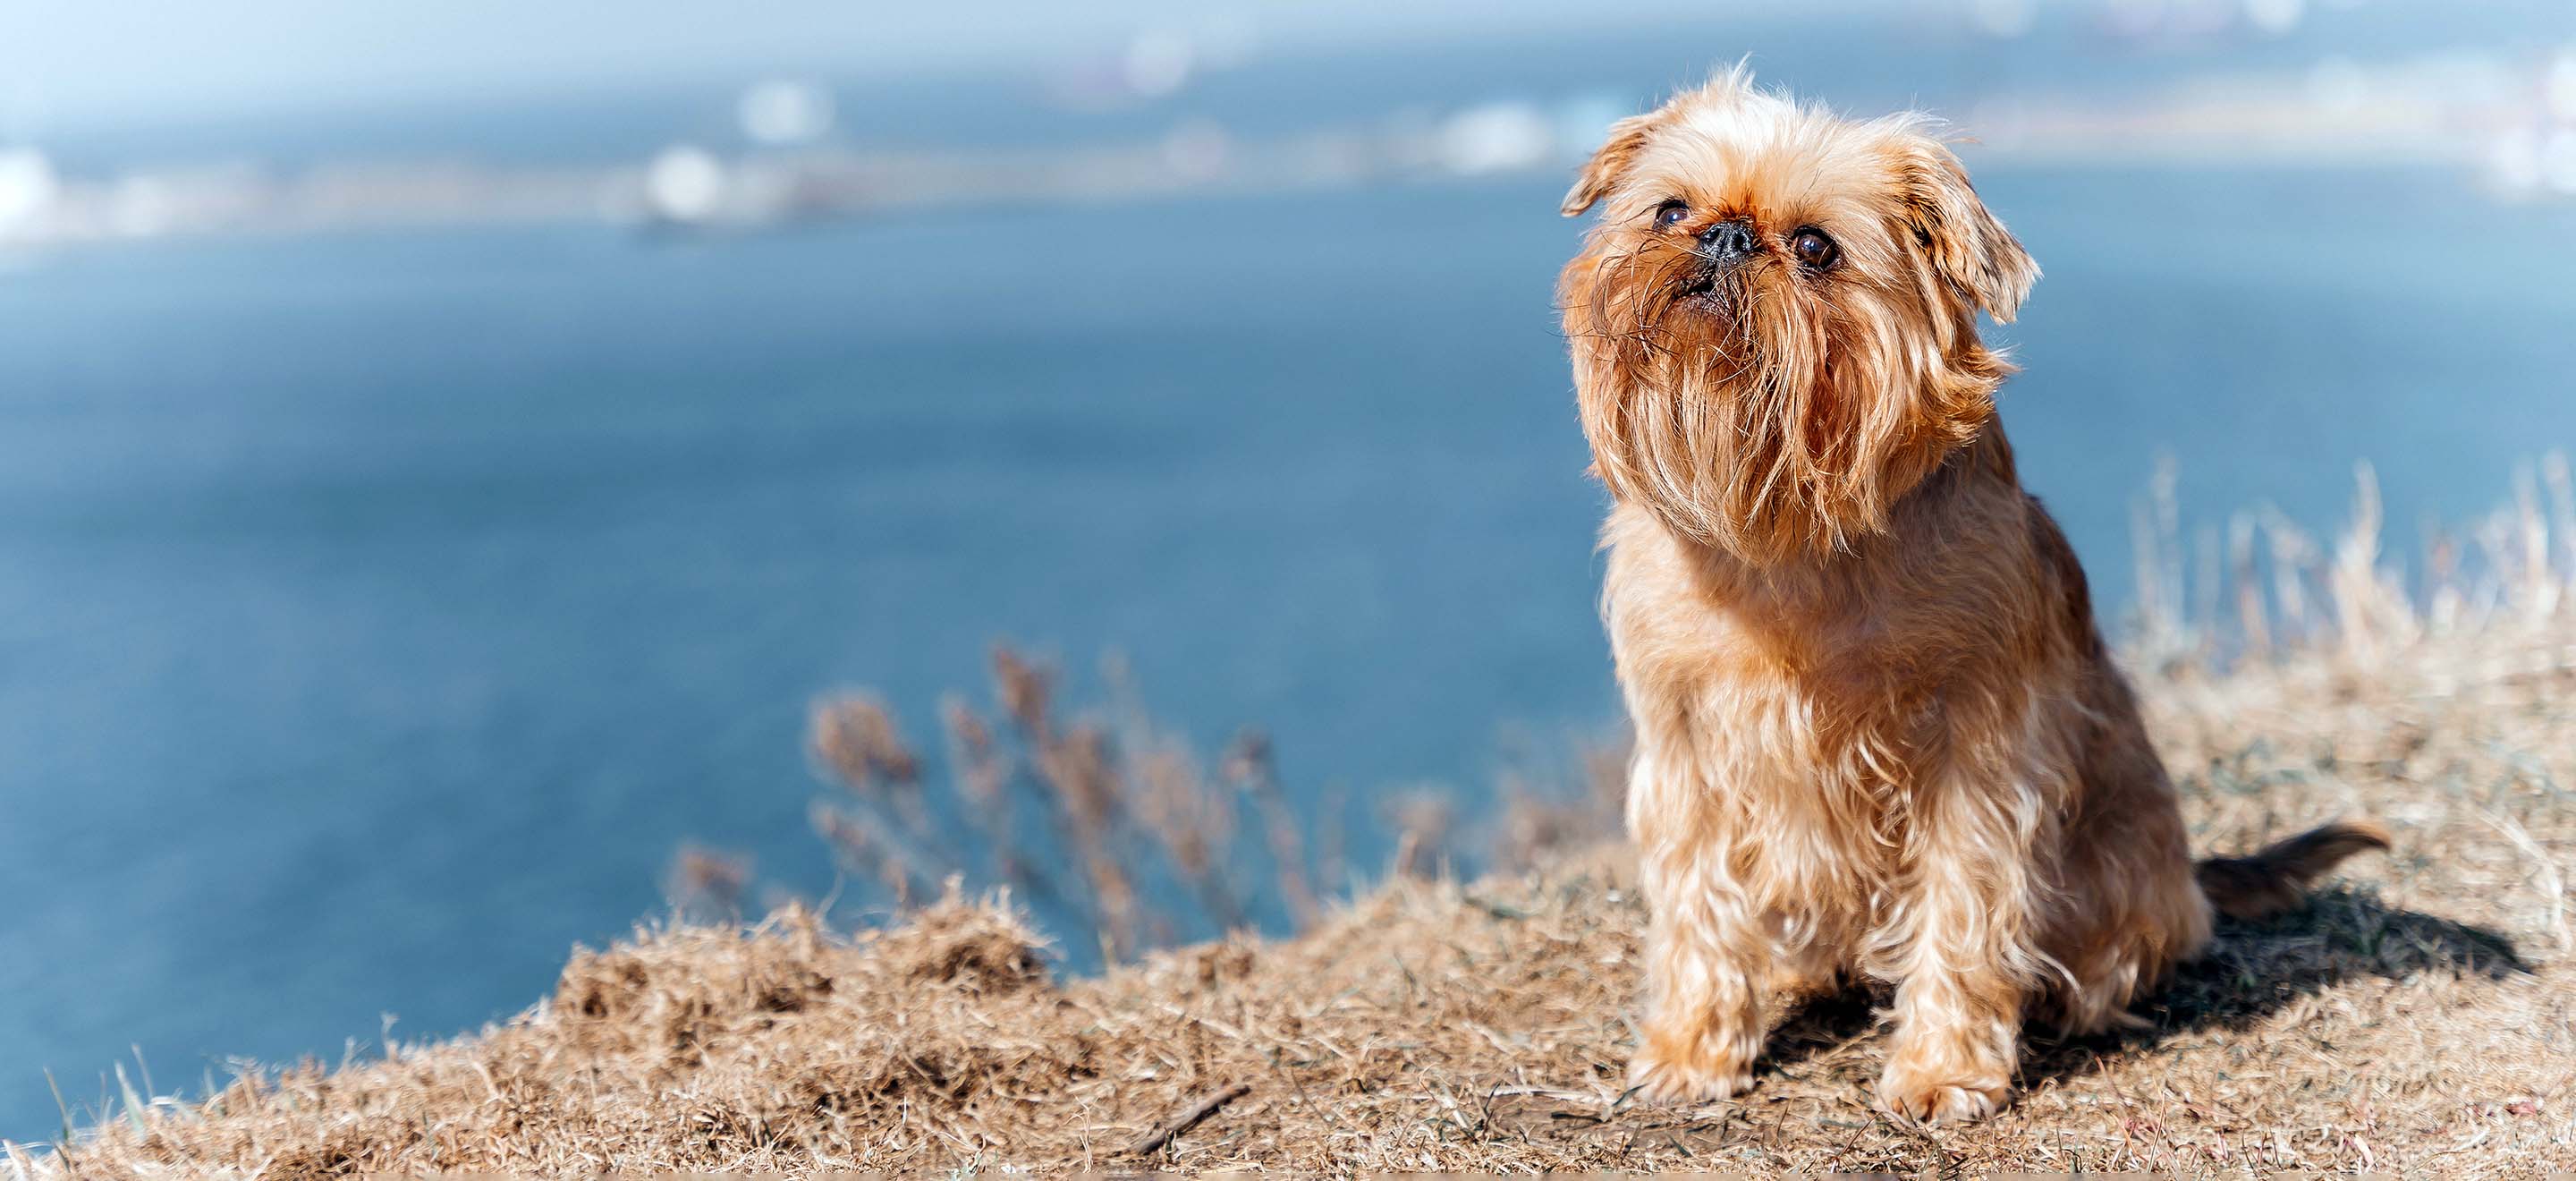 Tan Brussels Griffon sitting on a cliffside with a view of the ocean in the background image